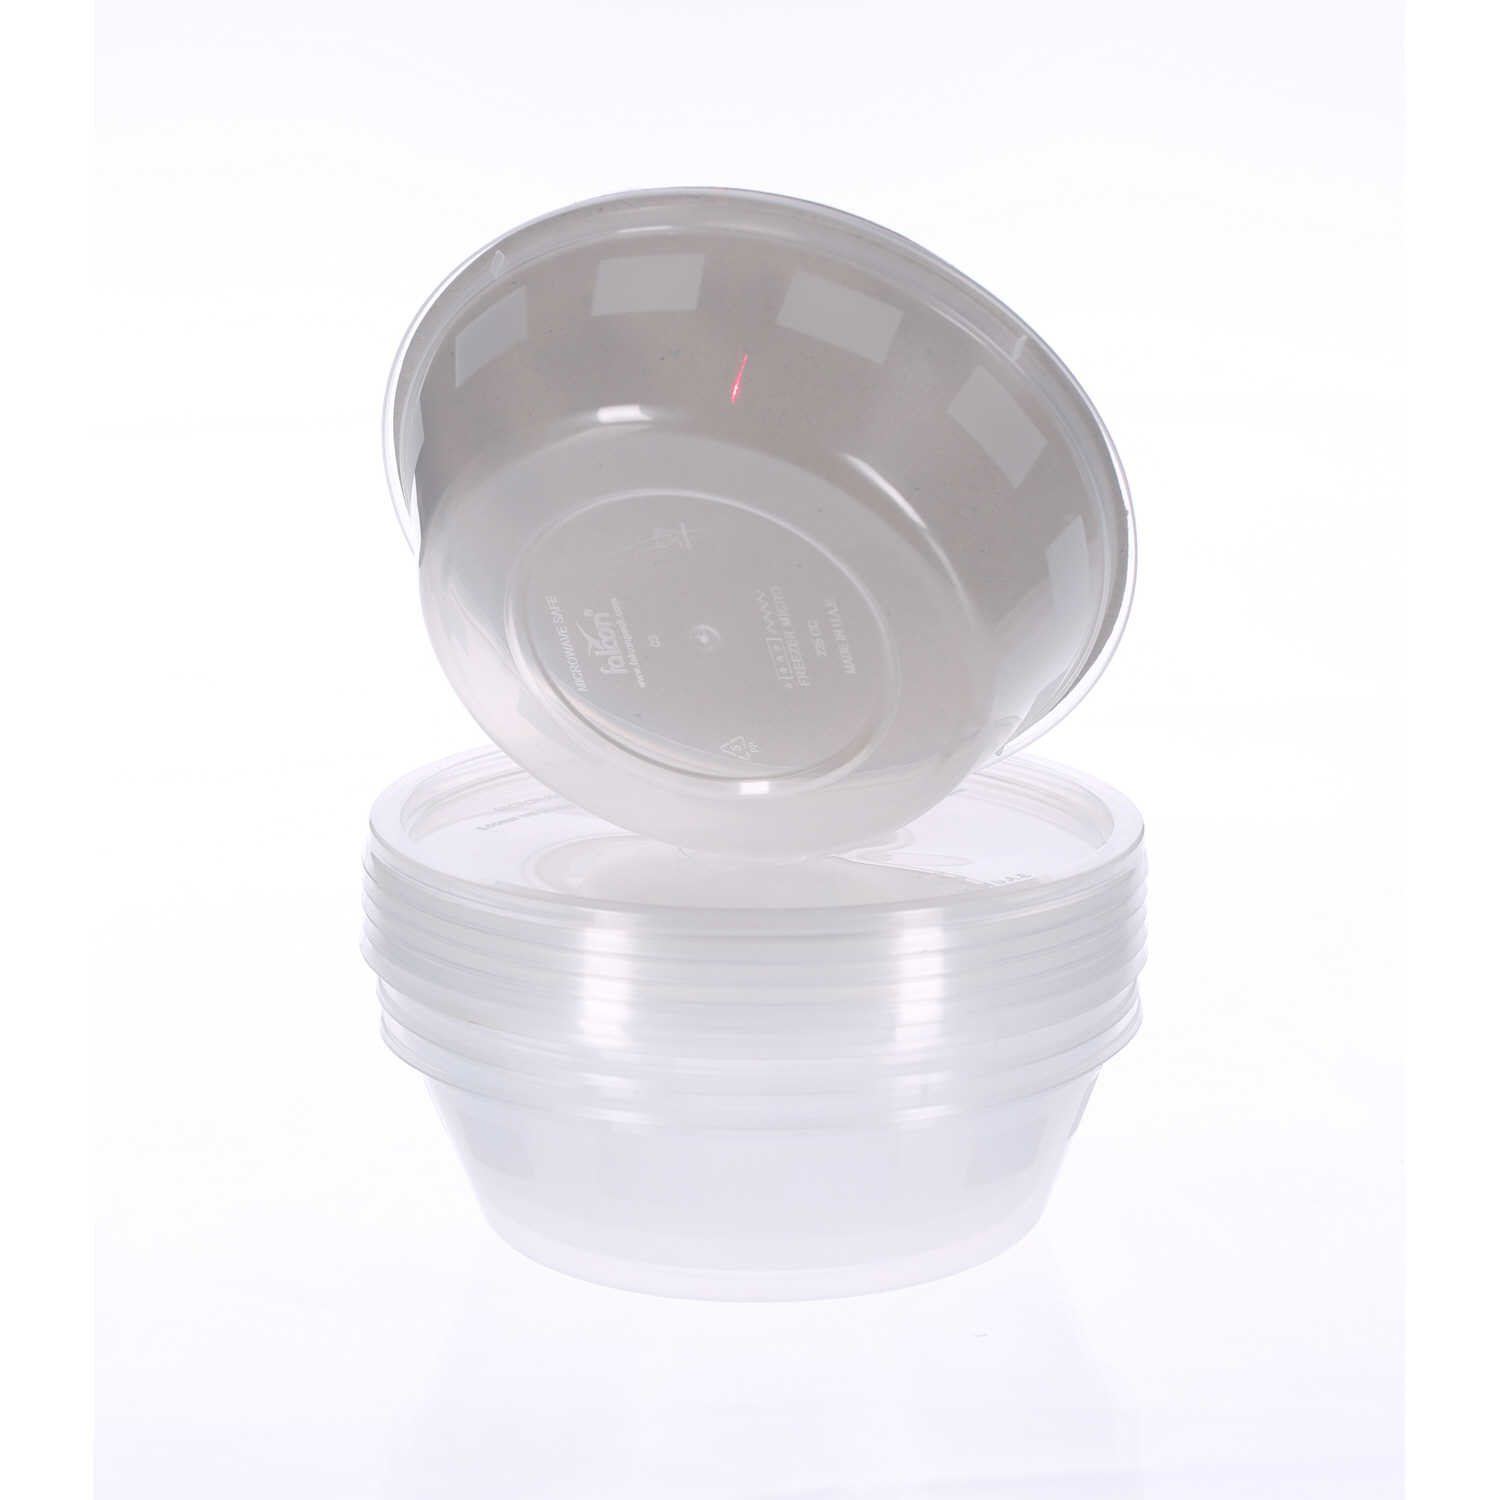 Falcon Retail Microwave Container Round 225cc with Lid 5 Pack